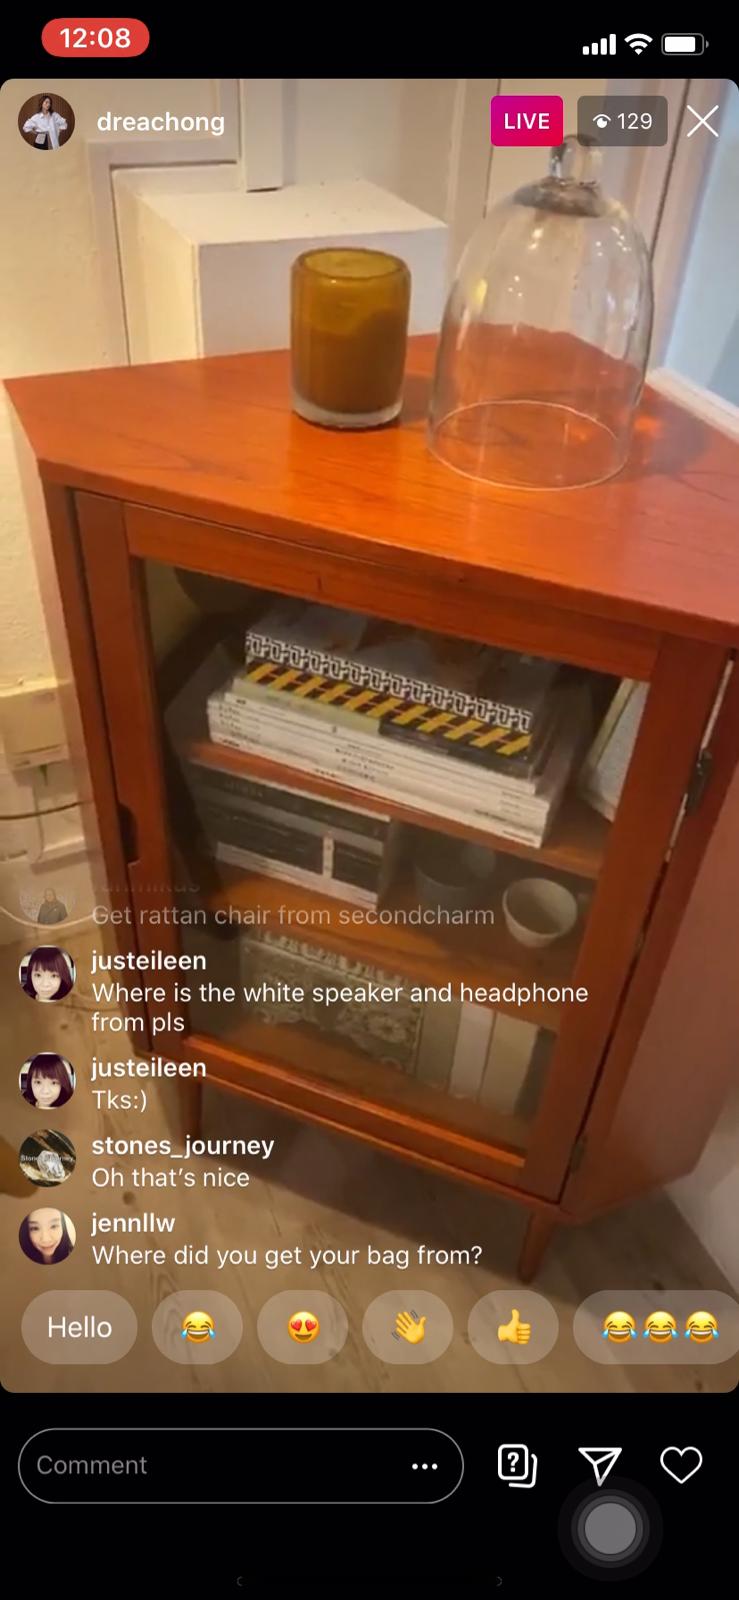 Born In Colour Skagen Danish Glass Cabinet (S) Featured in Andrea Chong's IG Live on Her DIY Workspace 2